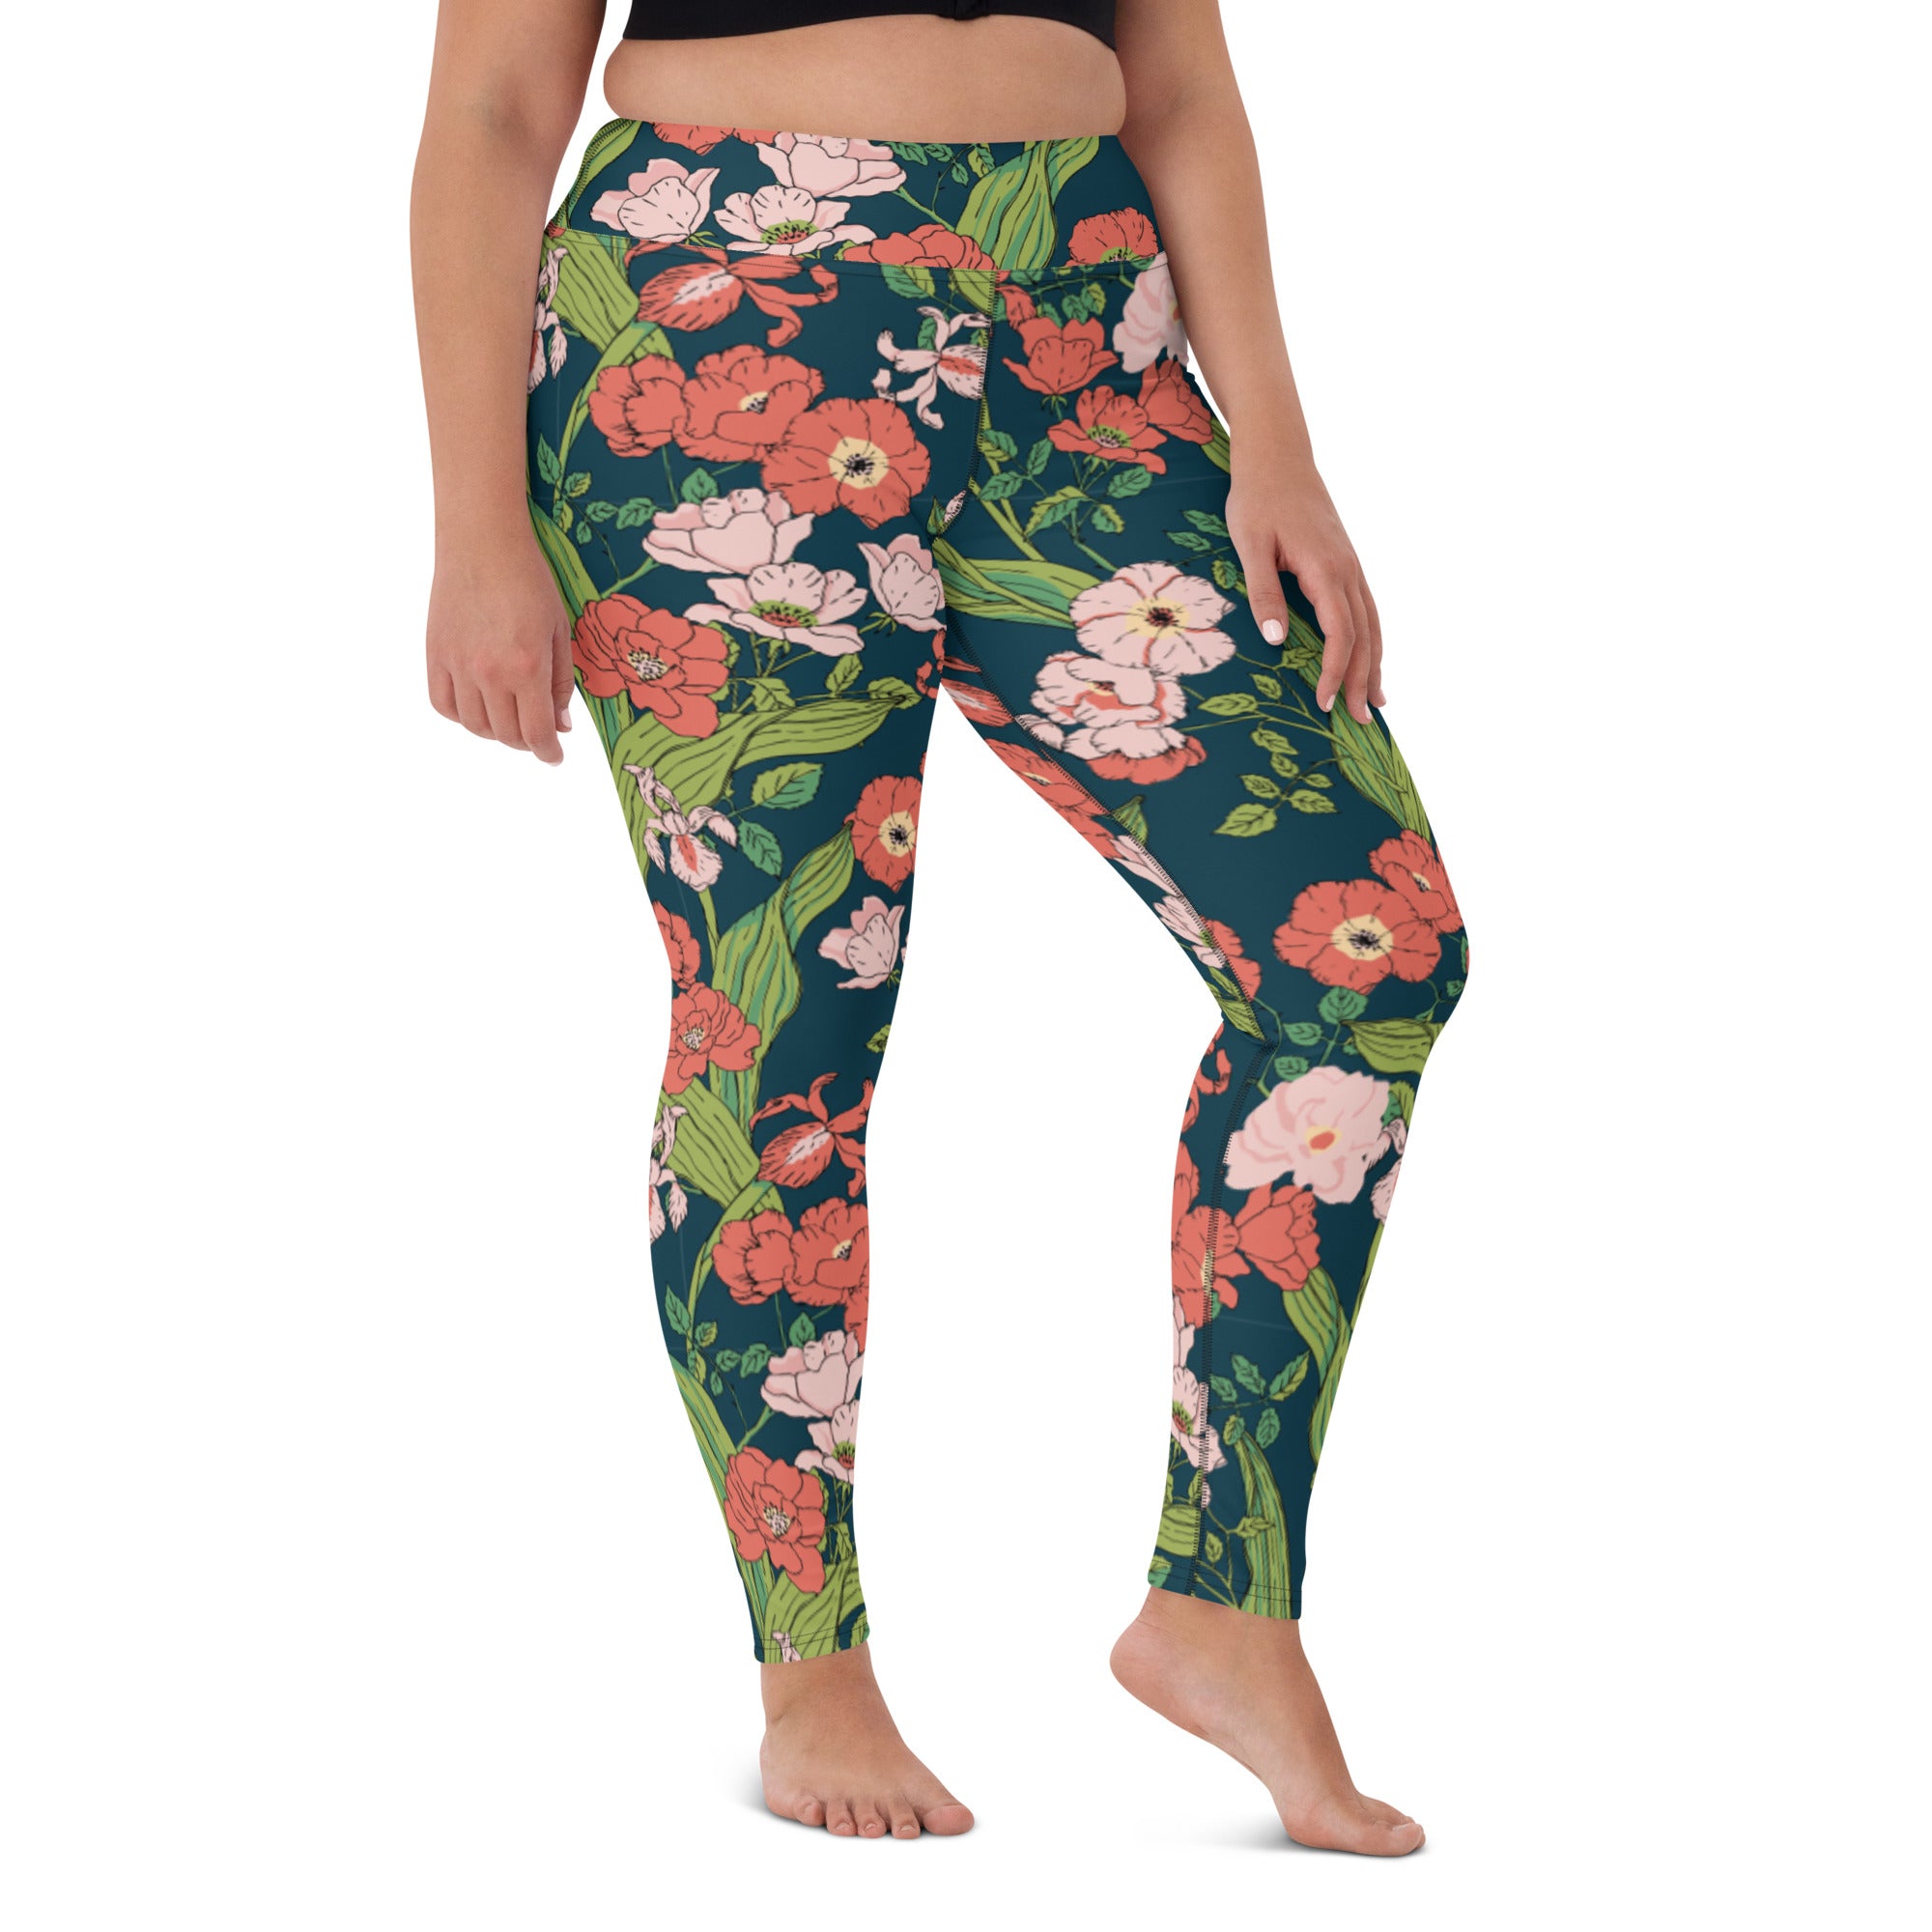 Buy Printed Legging with Blue Floral Print Online in India at Lowest Prices  - Price in India - buysnip.com